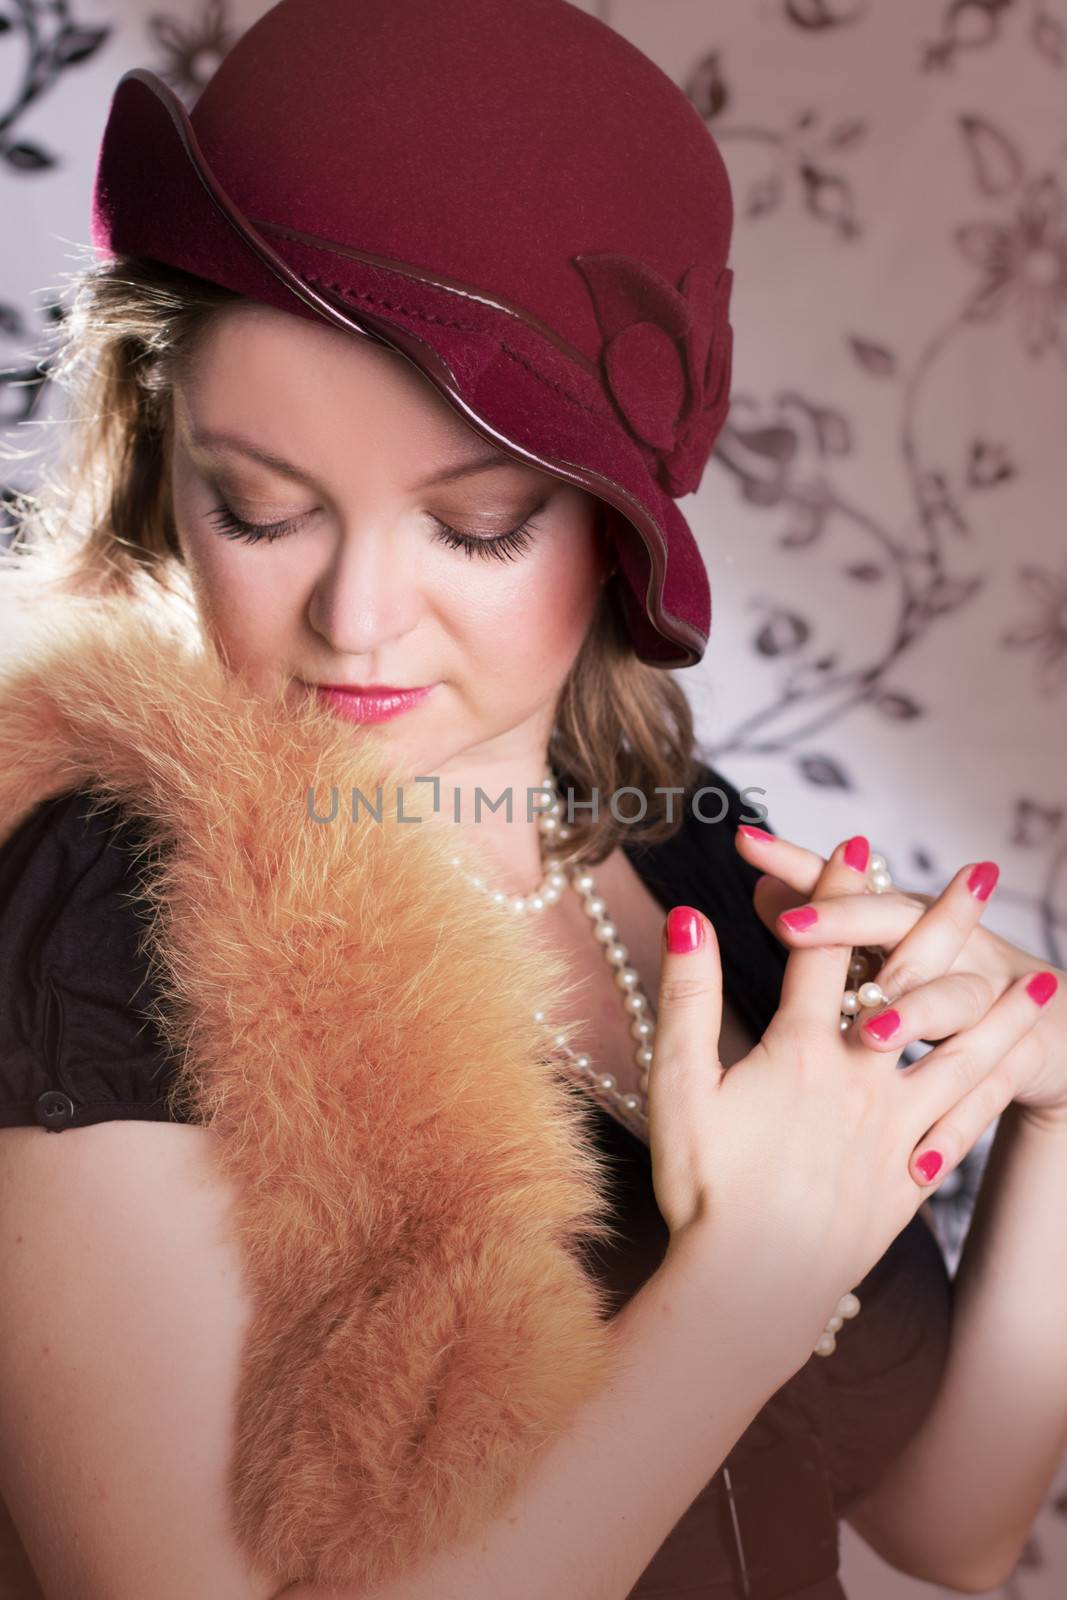 Retro woman in hat and boa with eyes closed over vintage back